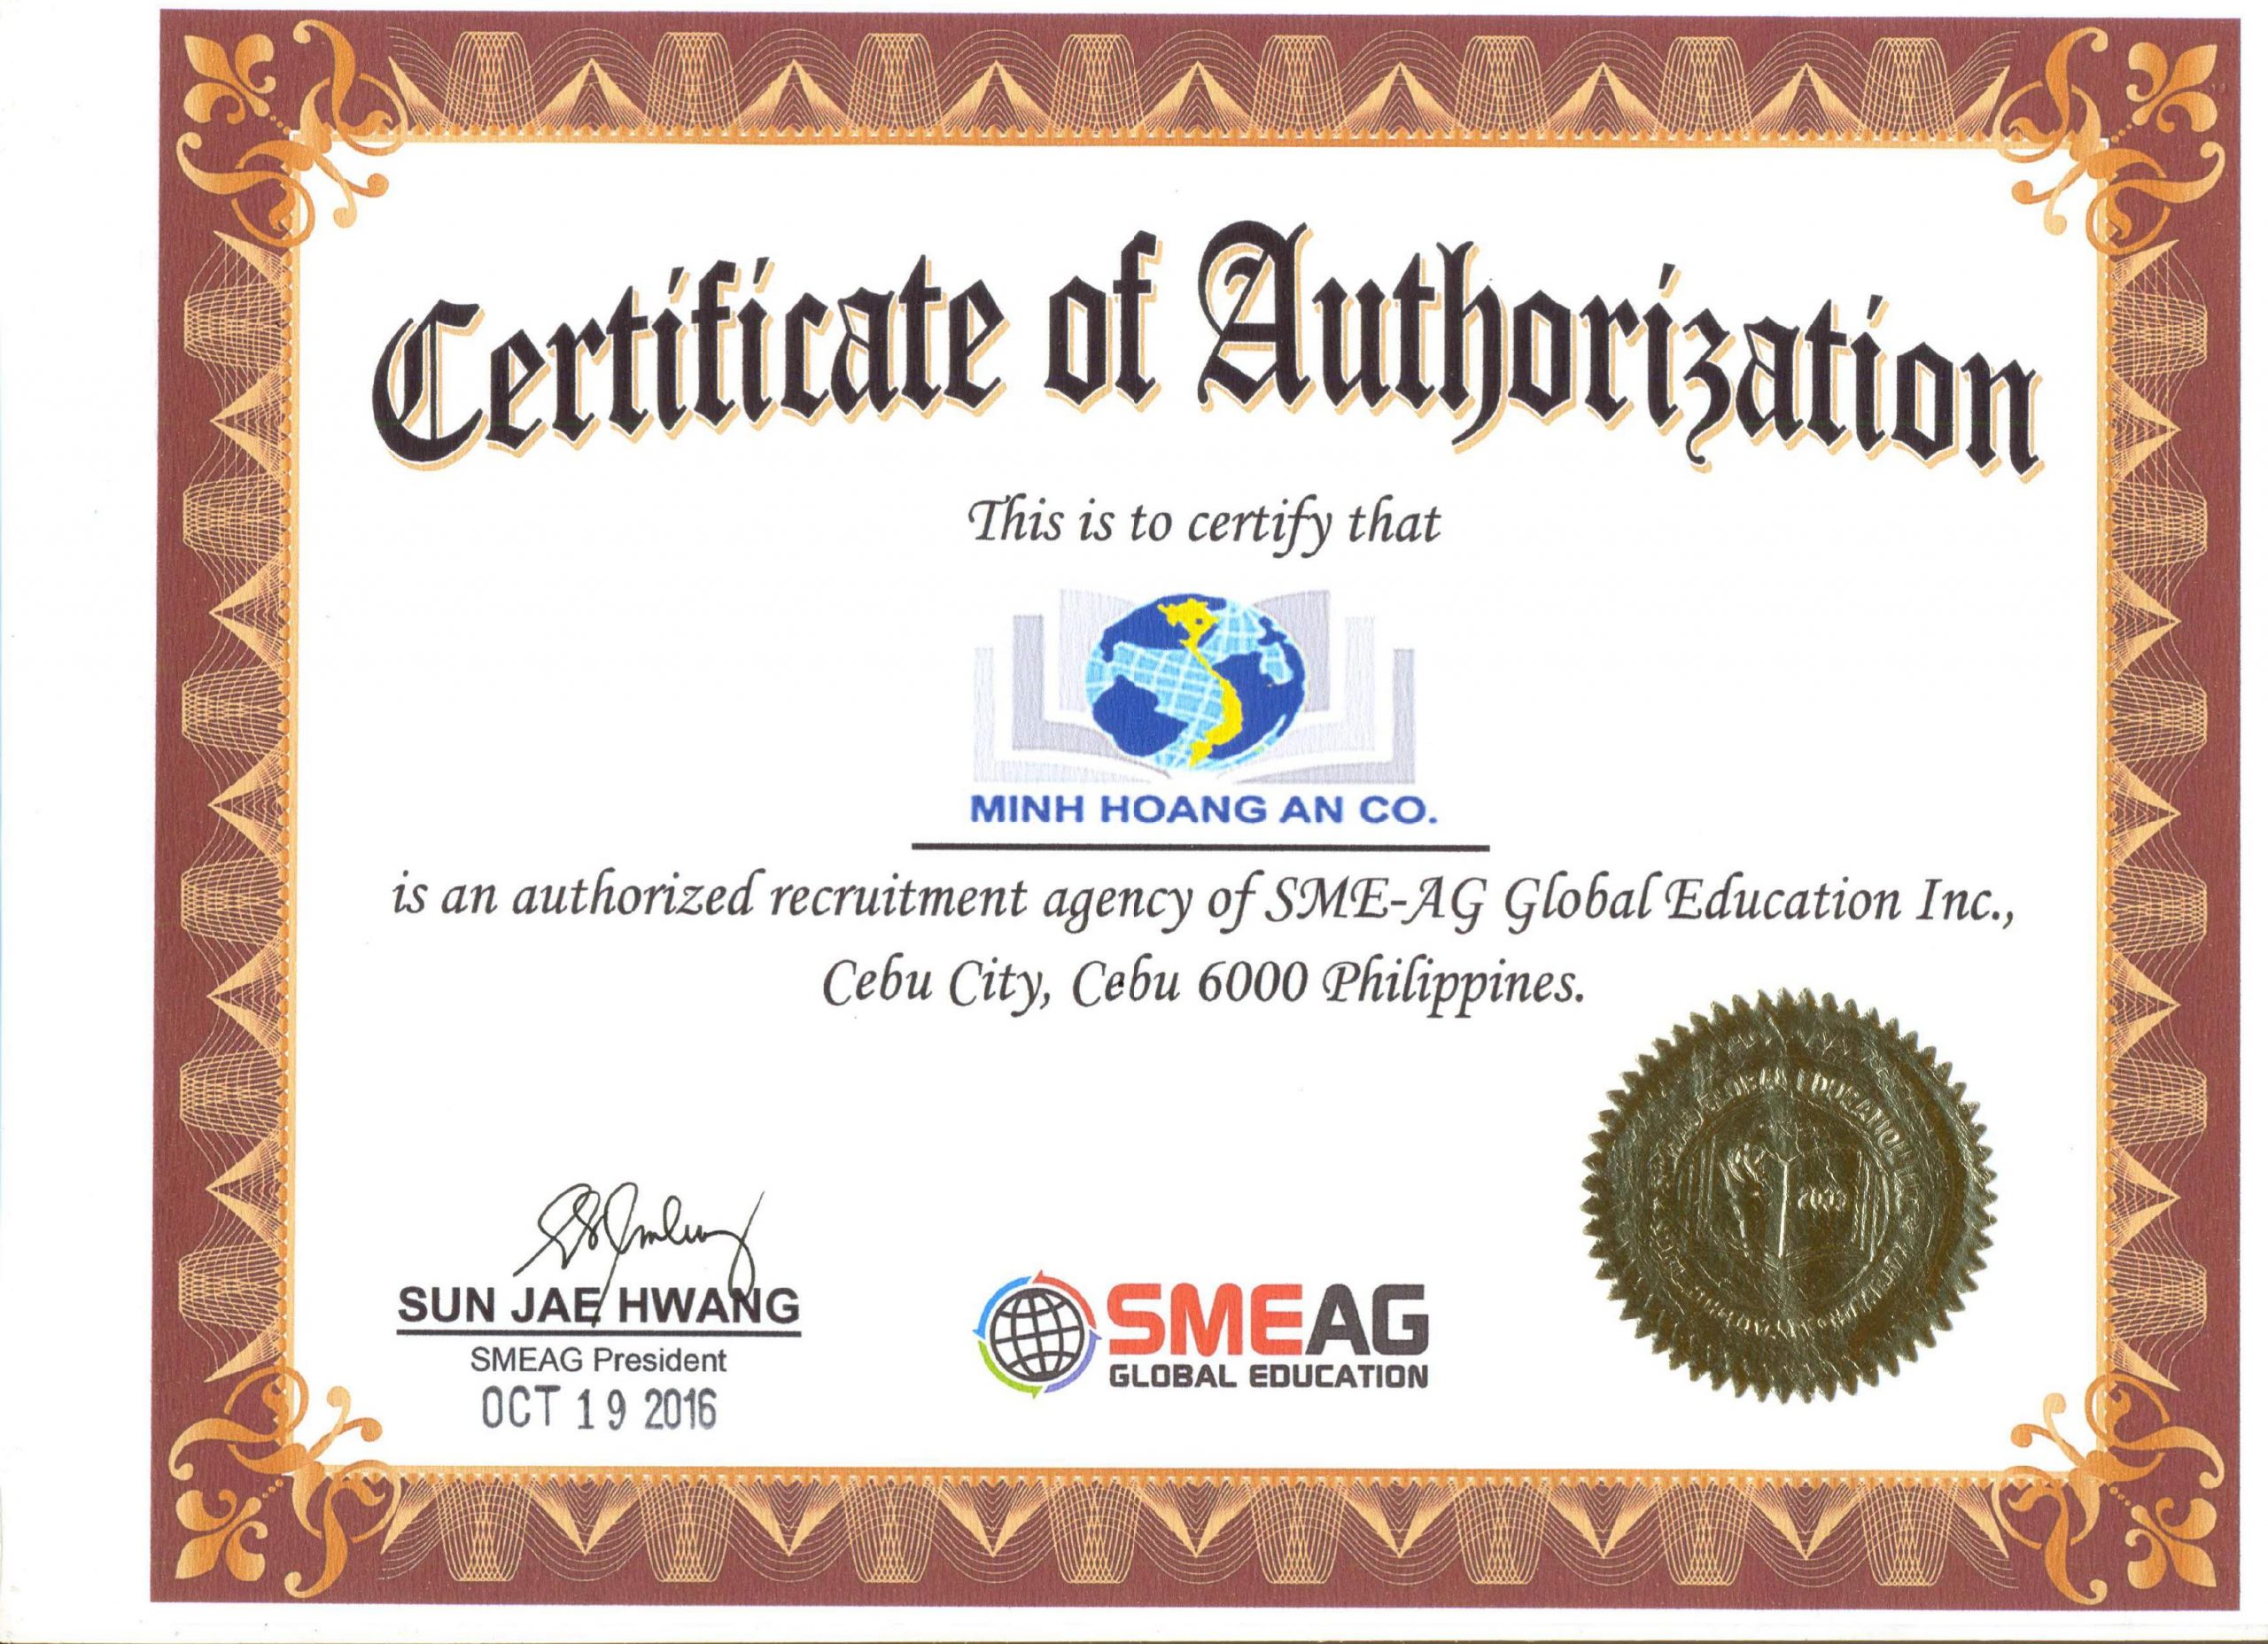 CERTIFICATE OF AUTHOIZATION_SMEAG0001